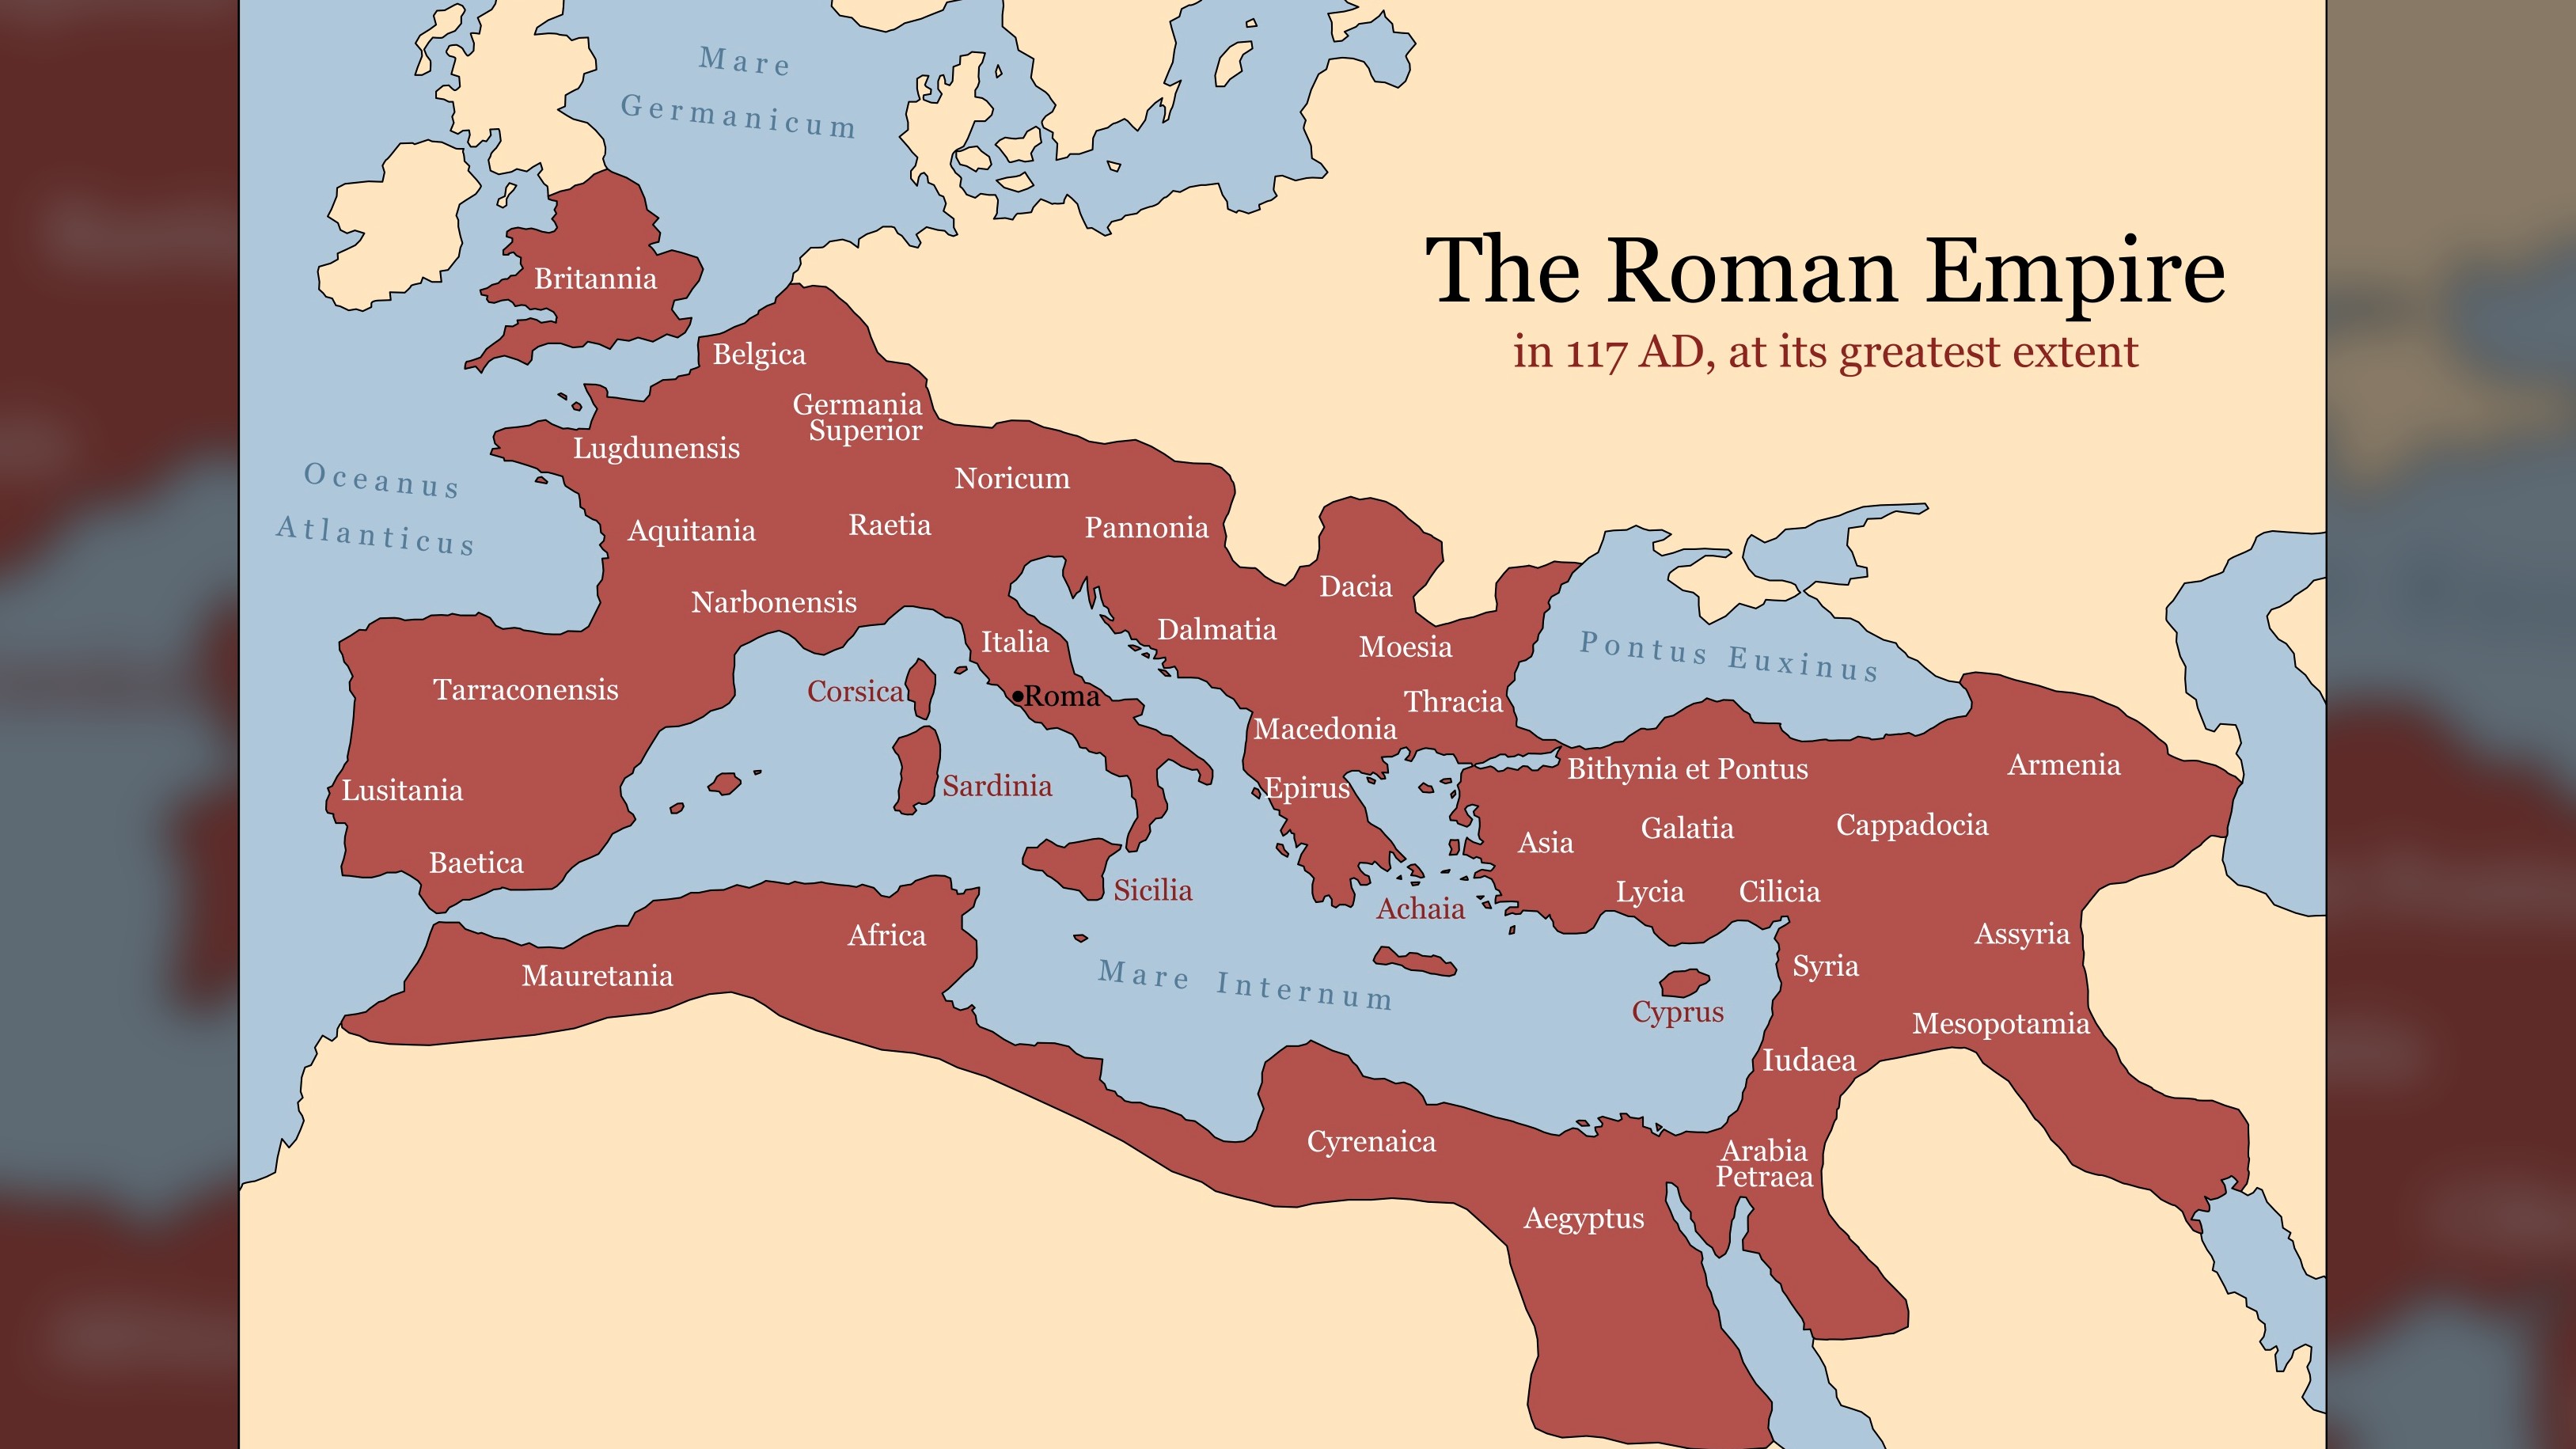 At its height, the Roman Empire's roads traversed continents to connect important cities and towns to its capital city.